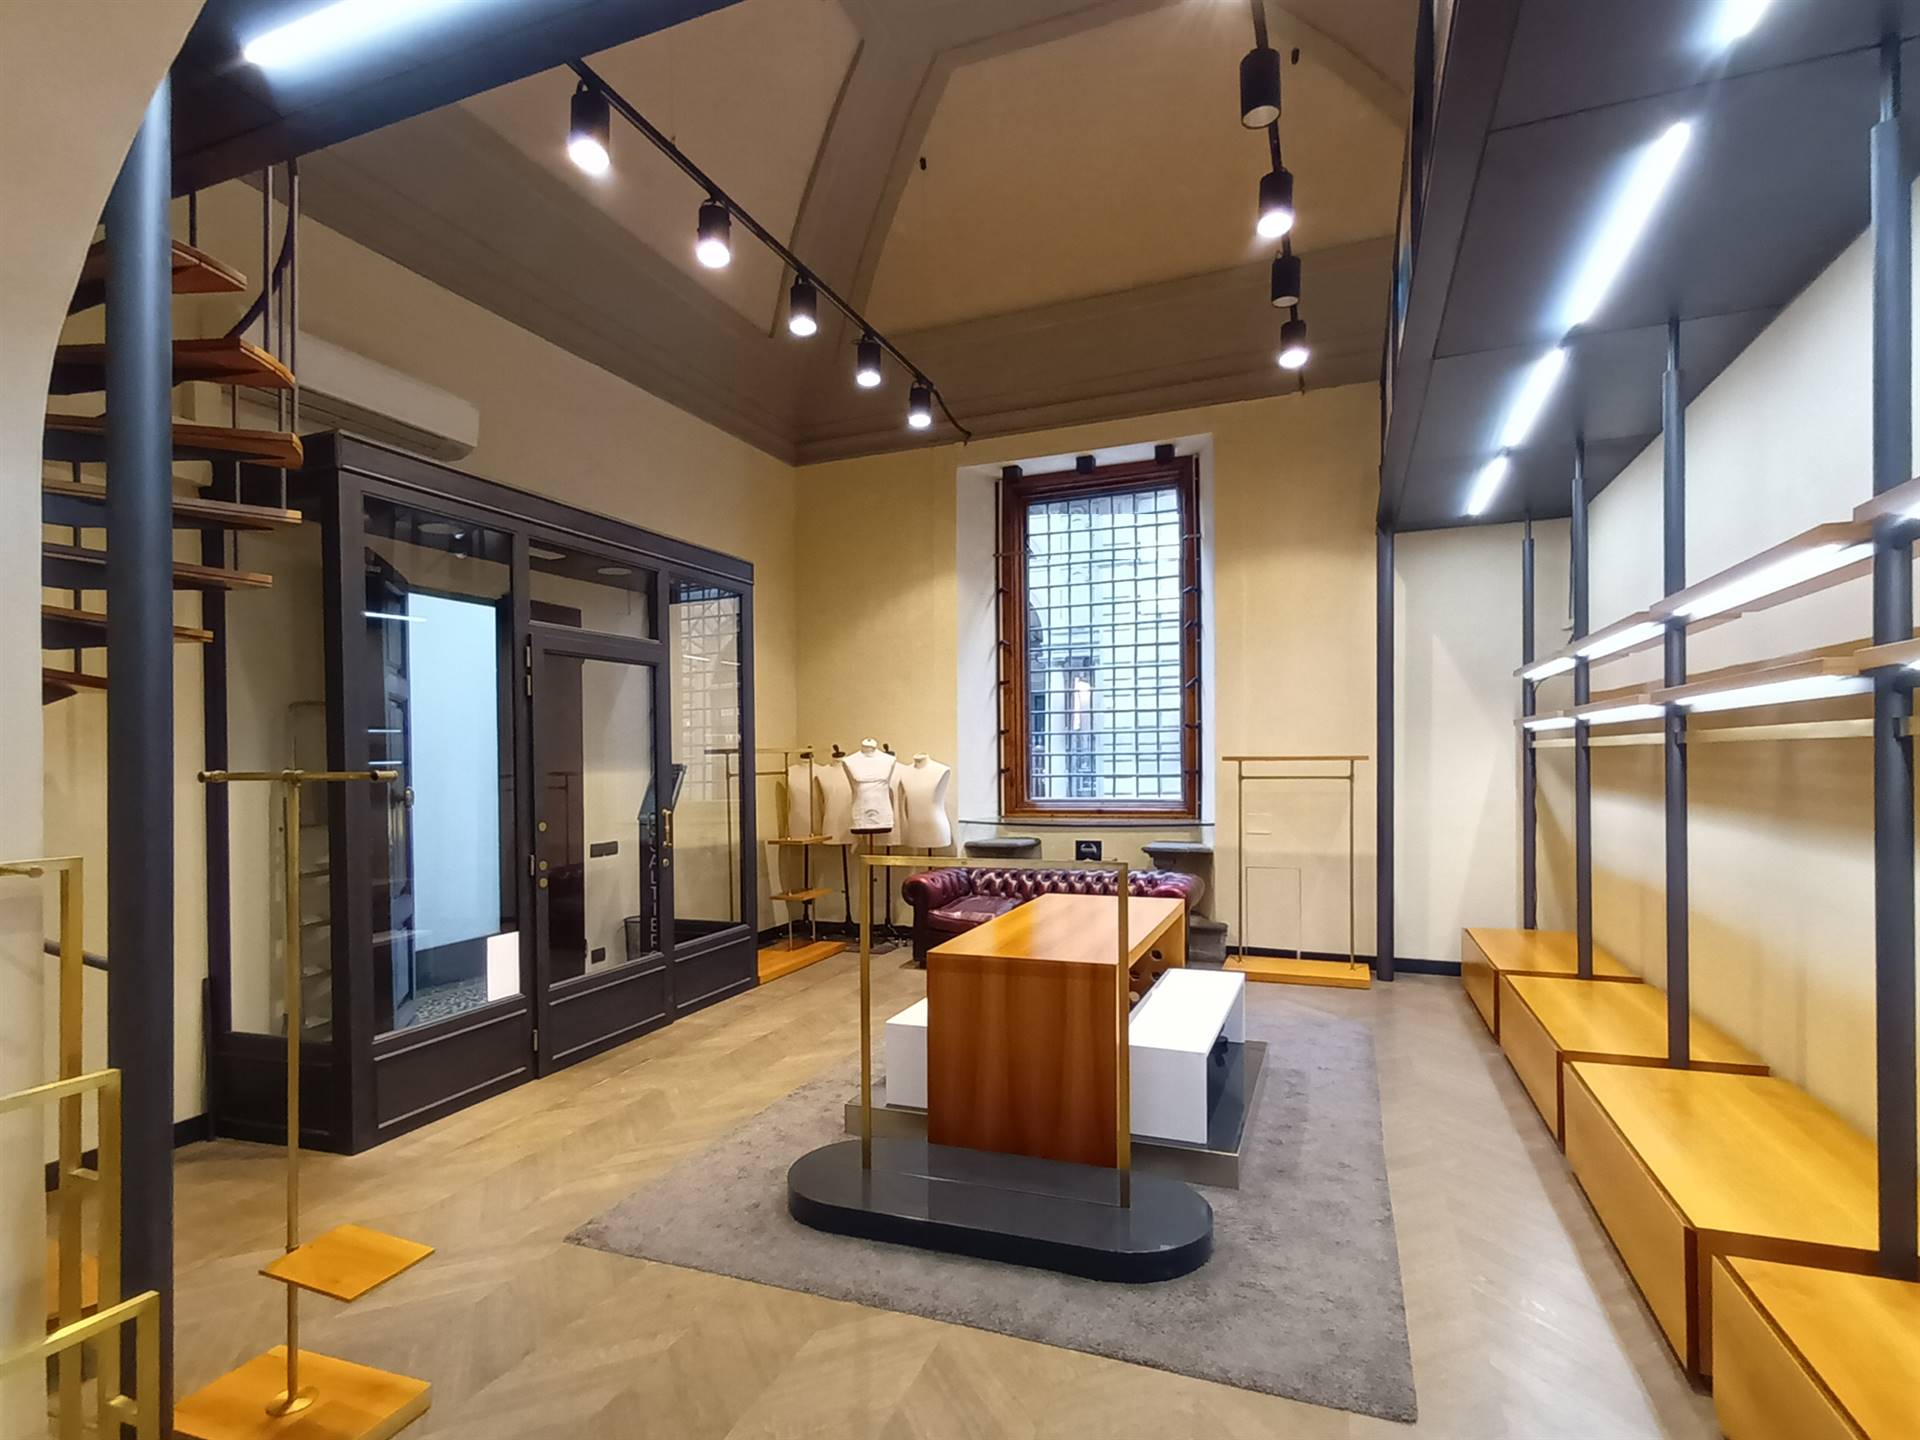 SANTA MARIA NOVELLA, FIRENZE, Commercial property for rent of 80 Sq. mt., Excellent Condition, Heating Individual heating system, Energetic class: G, 